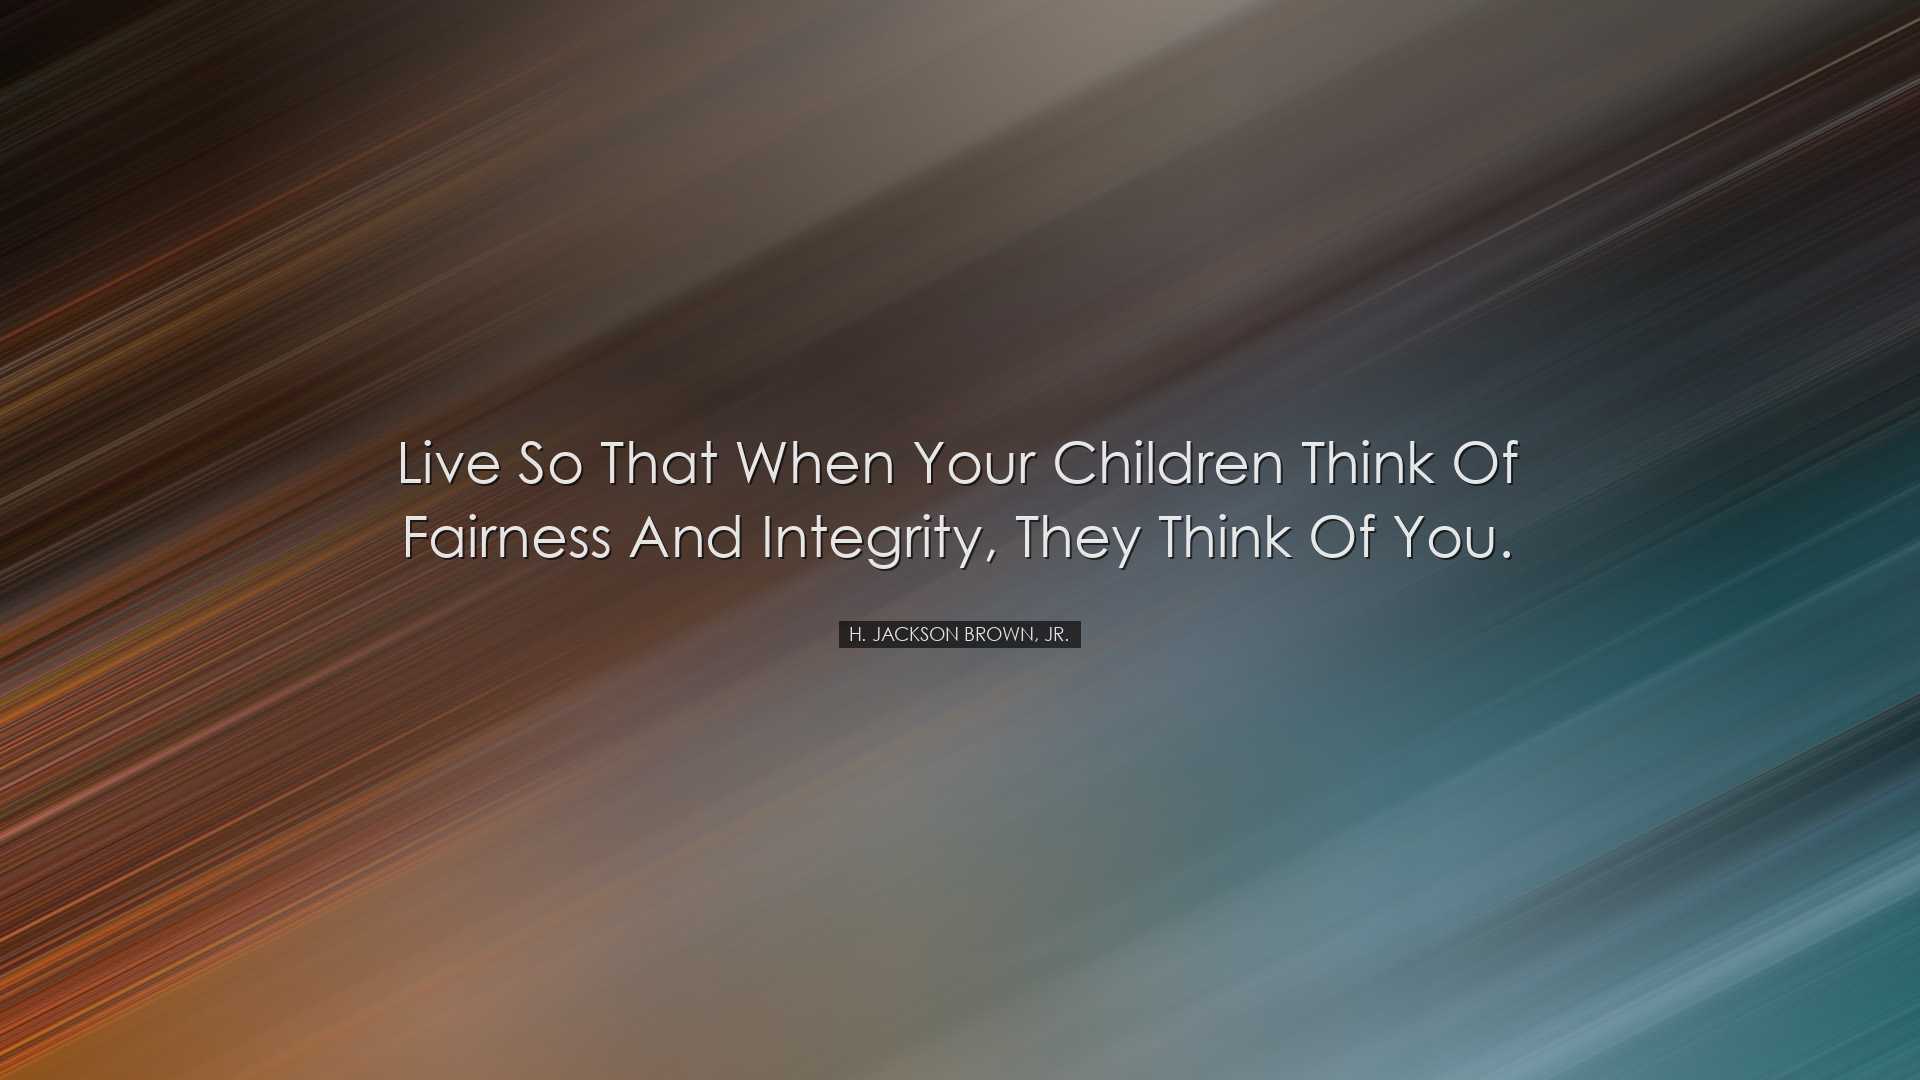 Live so that when your children think of fairness and integrity, t